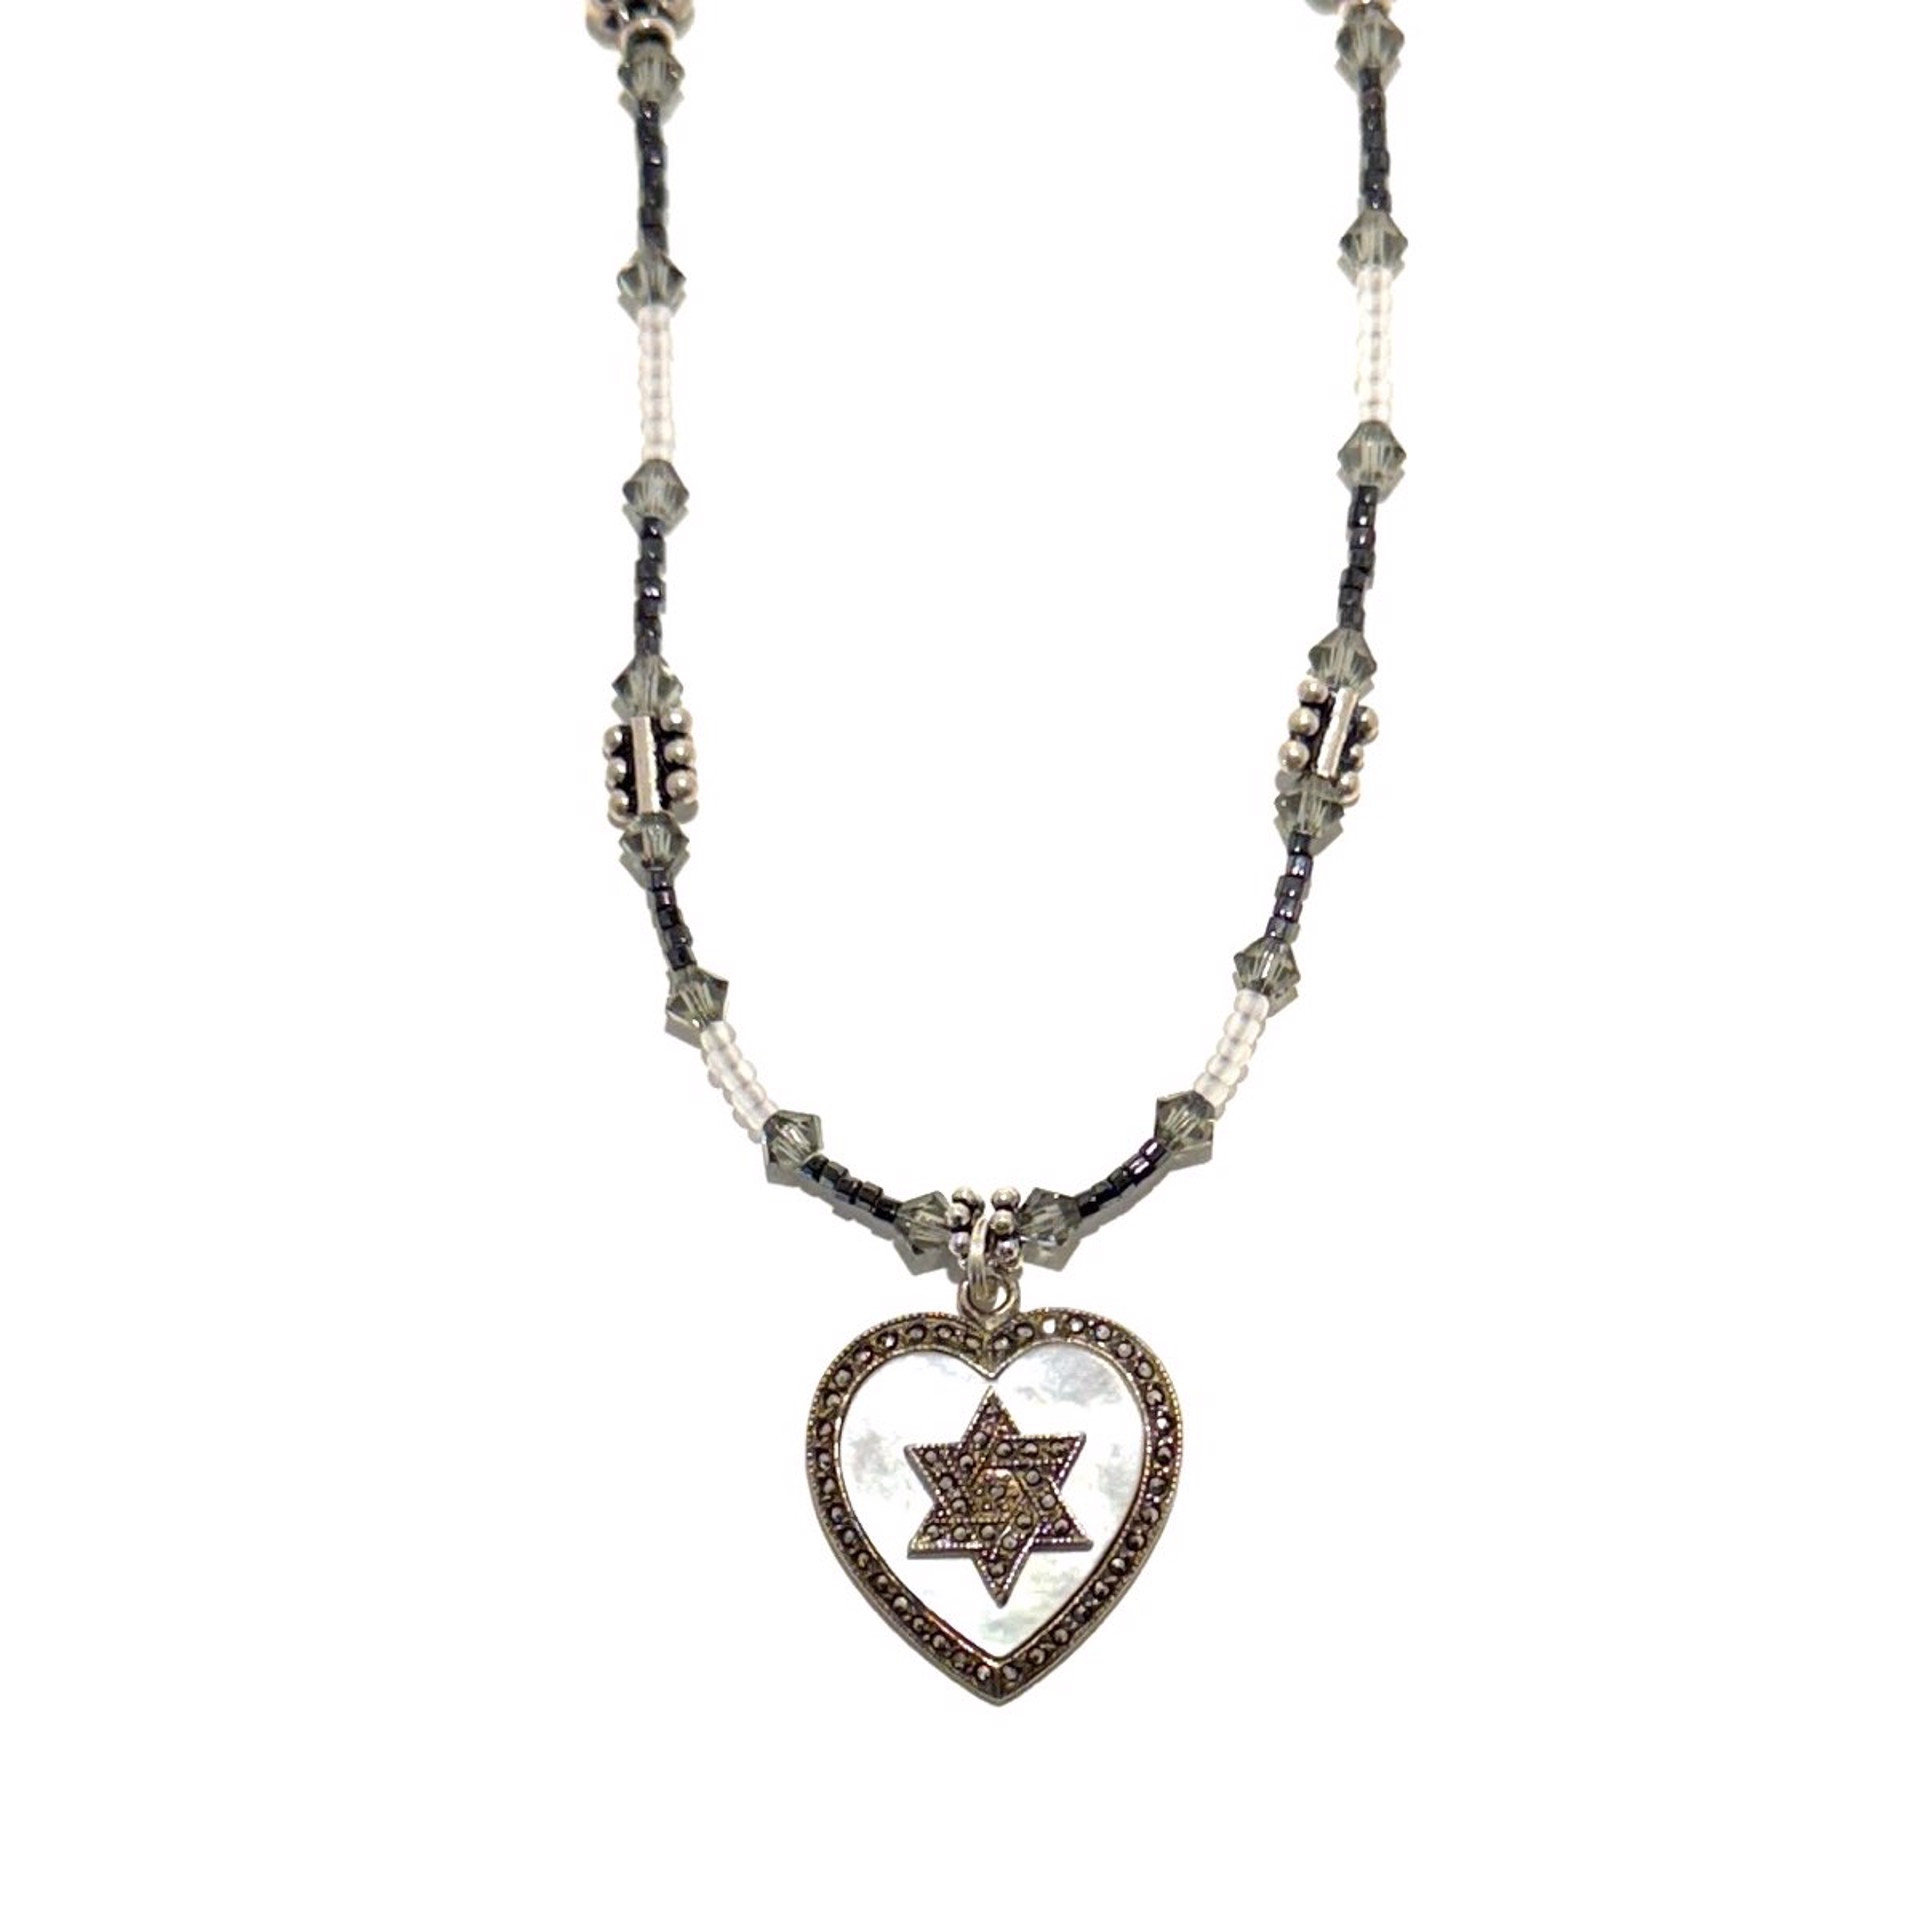 Vintage Mother of Pearl Star of David Hart Necklace SHOSH23-41 by Shoshannah Weinisch